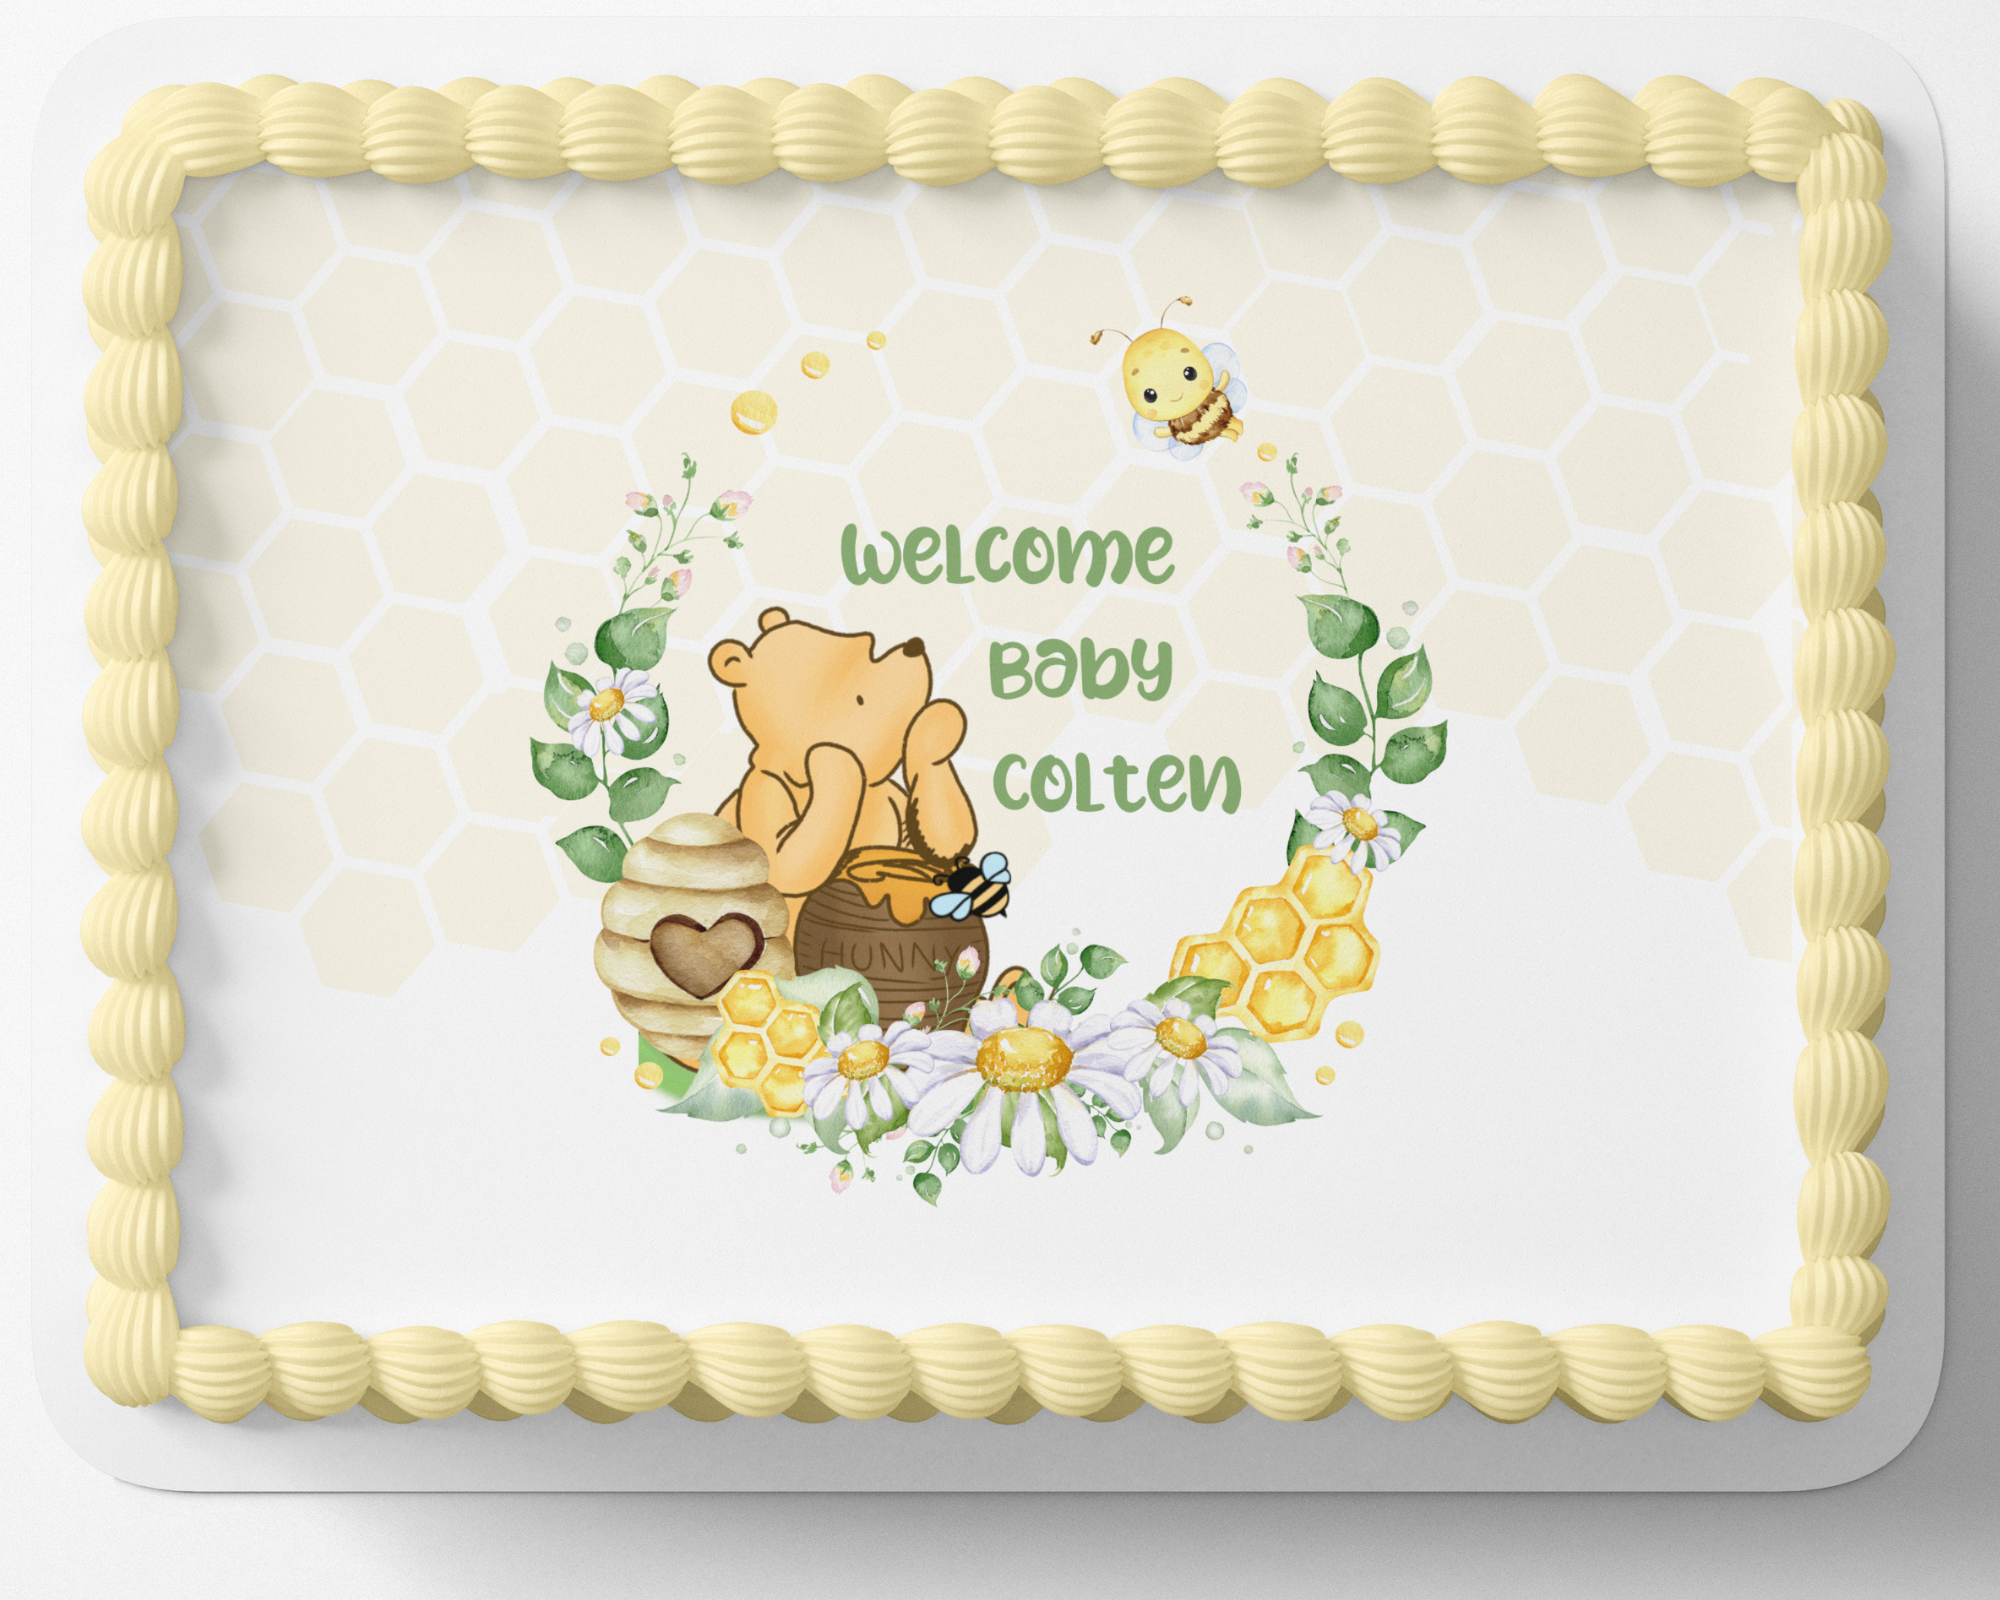 winnie the pooh baby shower sheet cakes